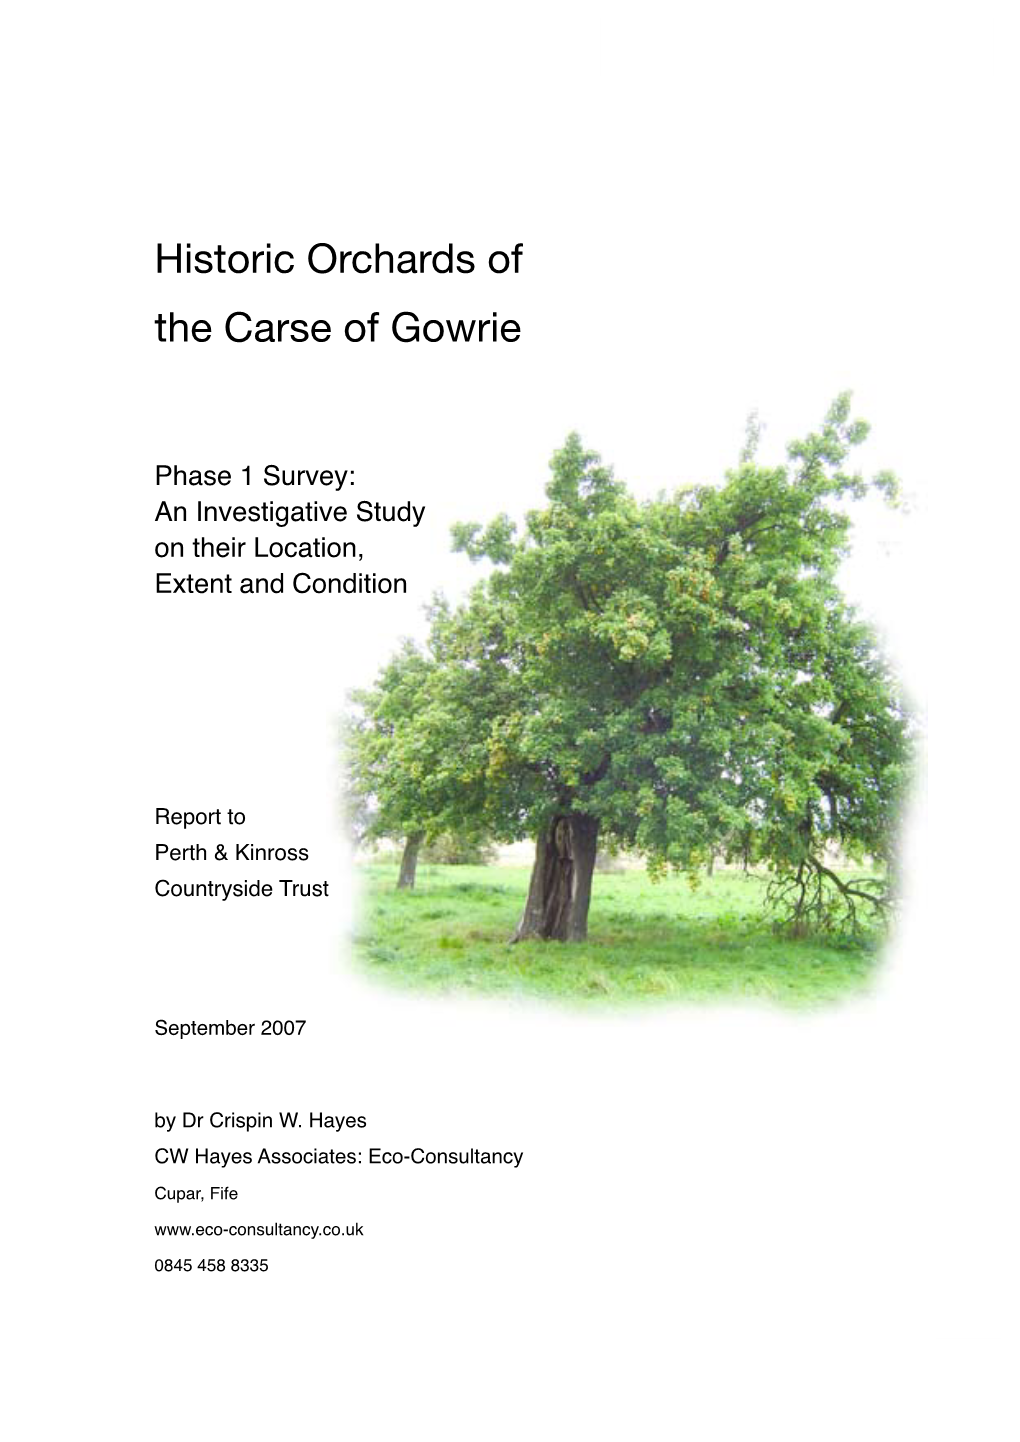 Historic Orchards of the Carse of Gowrie